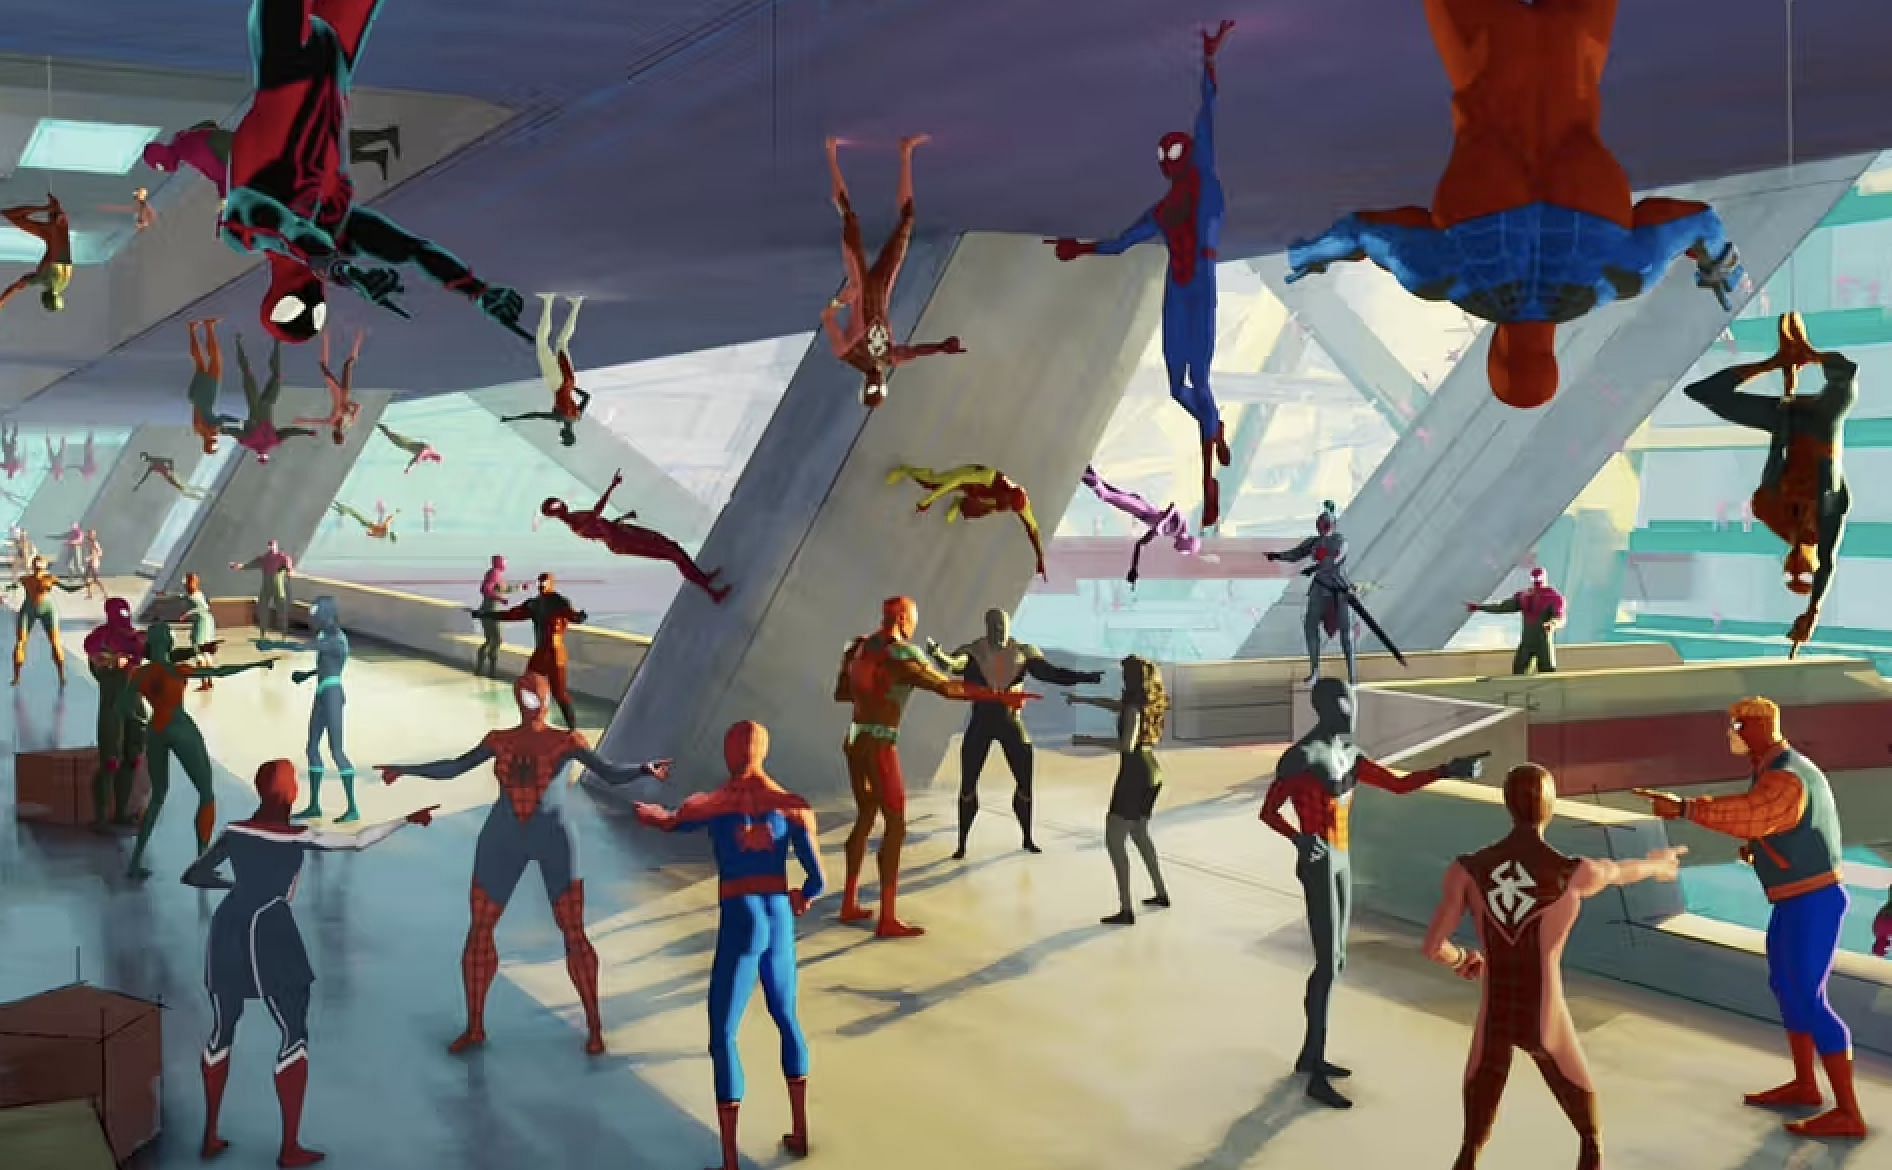 The iconic pointing meme returns, as all Spider-Men point at each other in the midst of action (Image via Sony Pictures)